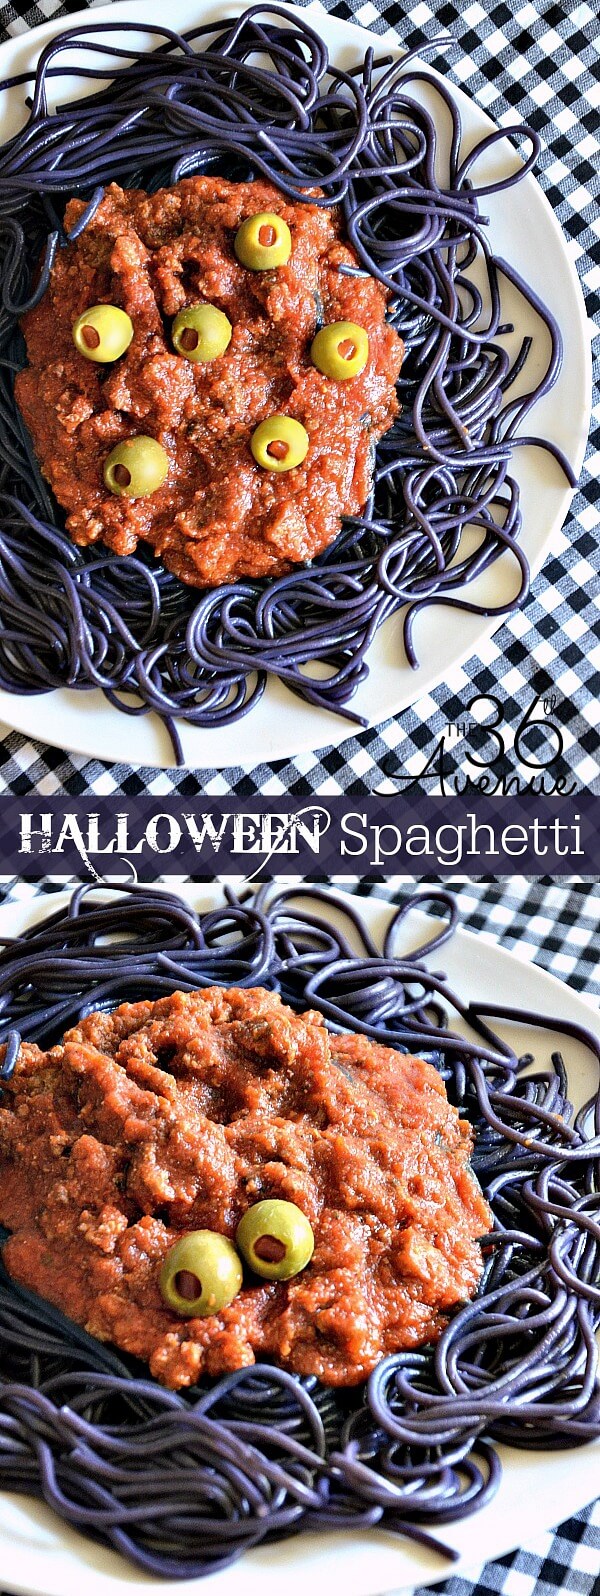 Halloween Spaghetti | Halloween Party Food Ideas | Halloween Party Themes For Adults